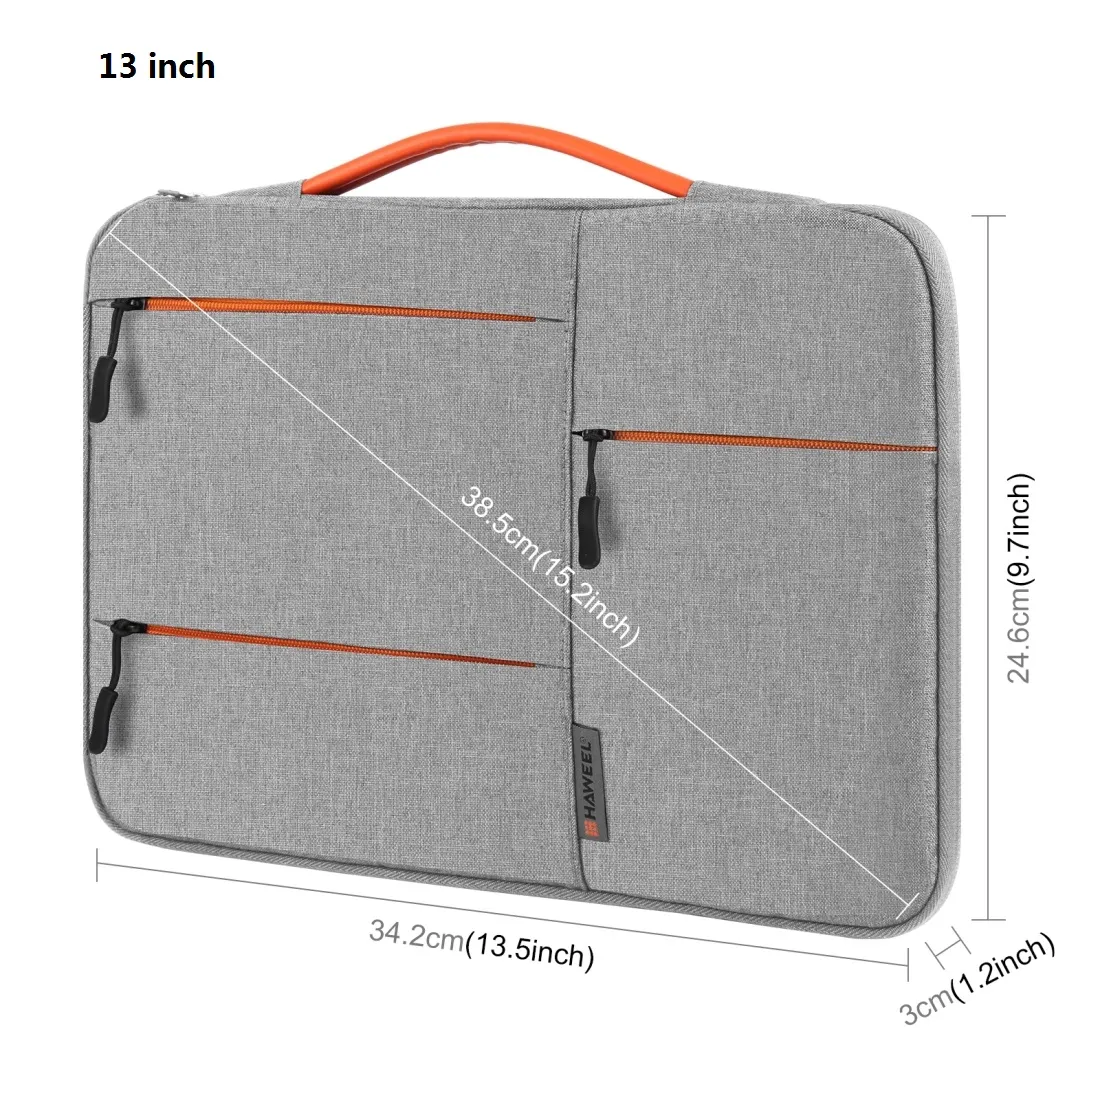 Laptop Sleeve With Pocket Zipper Briefcase and Handle for 13”, 14”, 15” MacBook and Notebook Computer Bag